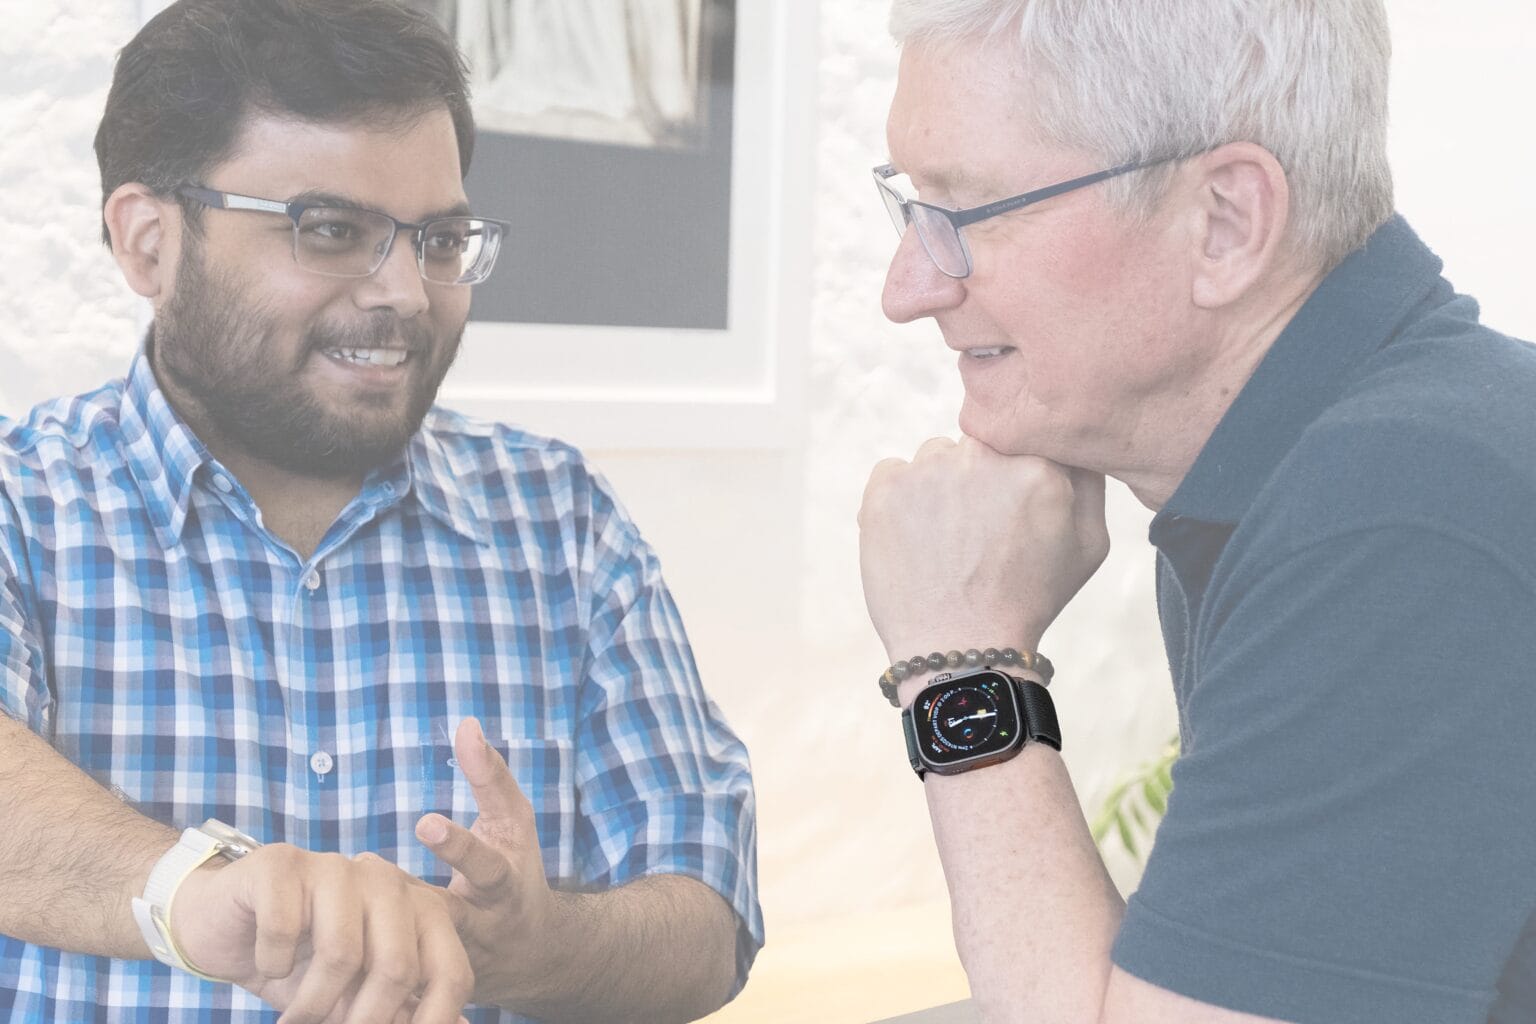 Image of Tim Cook with his Apple Watch highlighted.